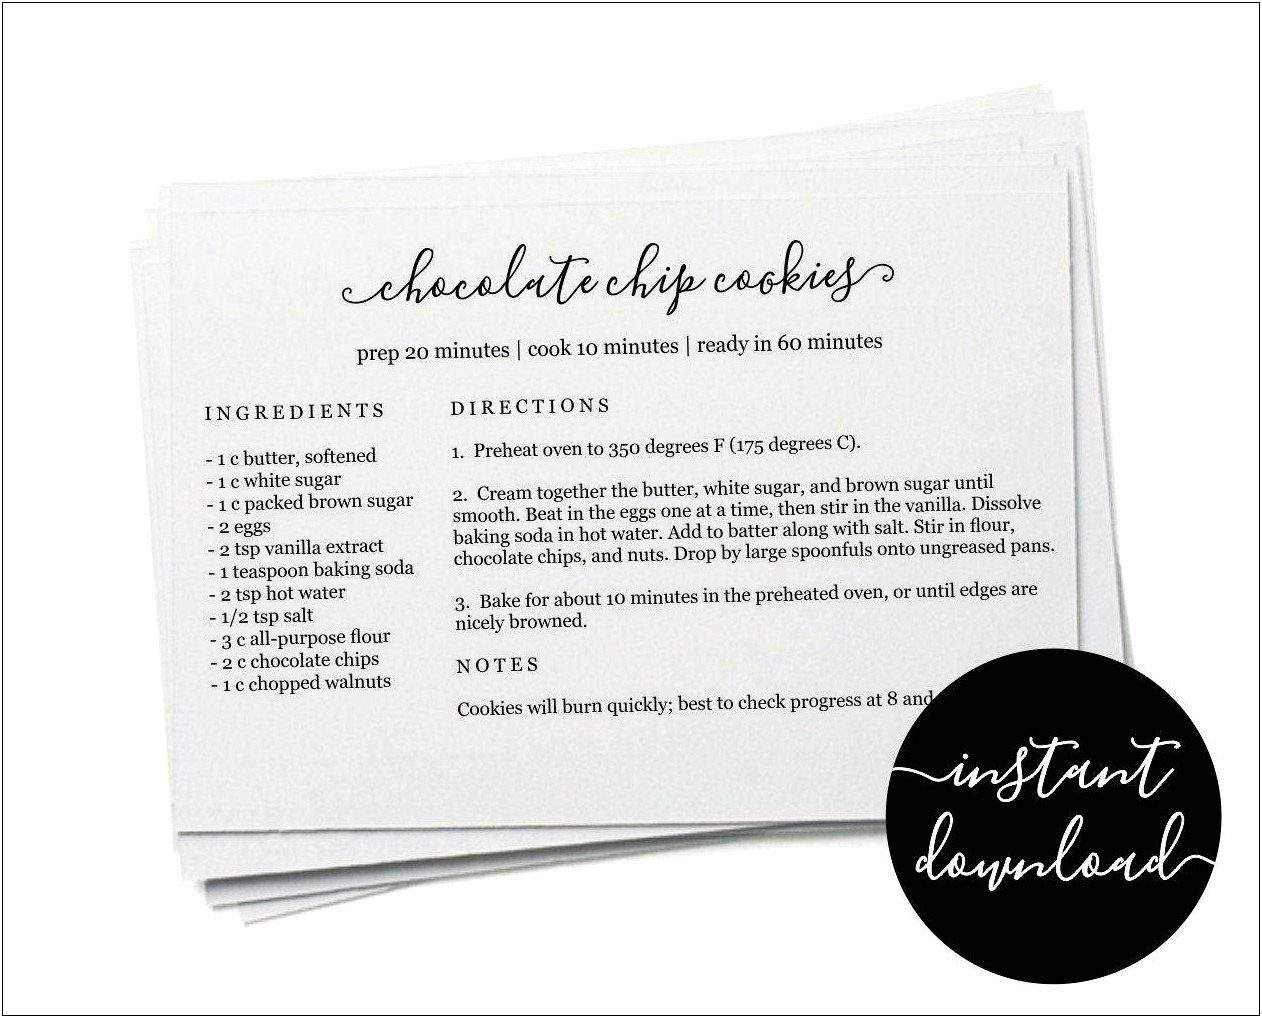 Free Fillable Recipe Card Template For Word